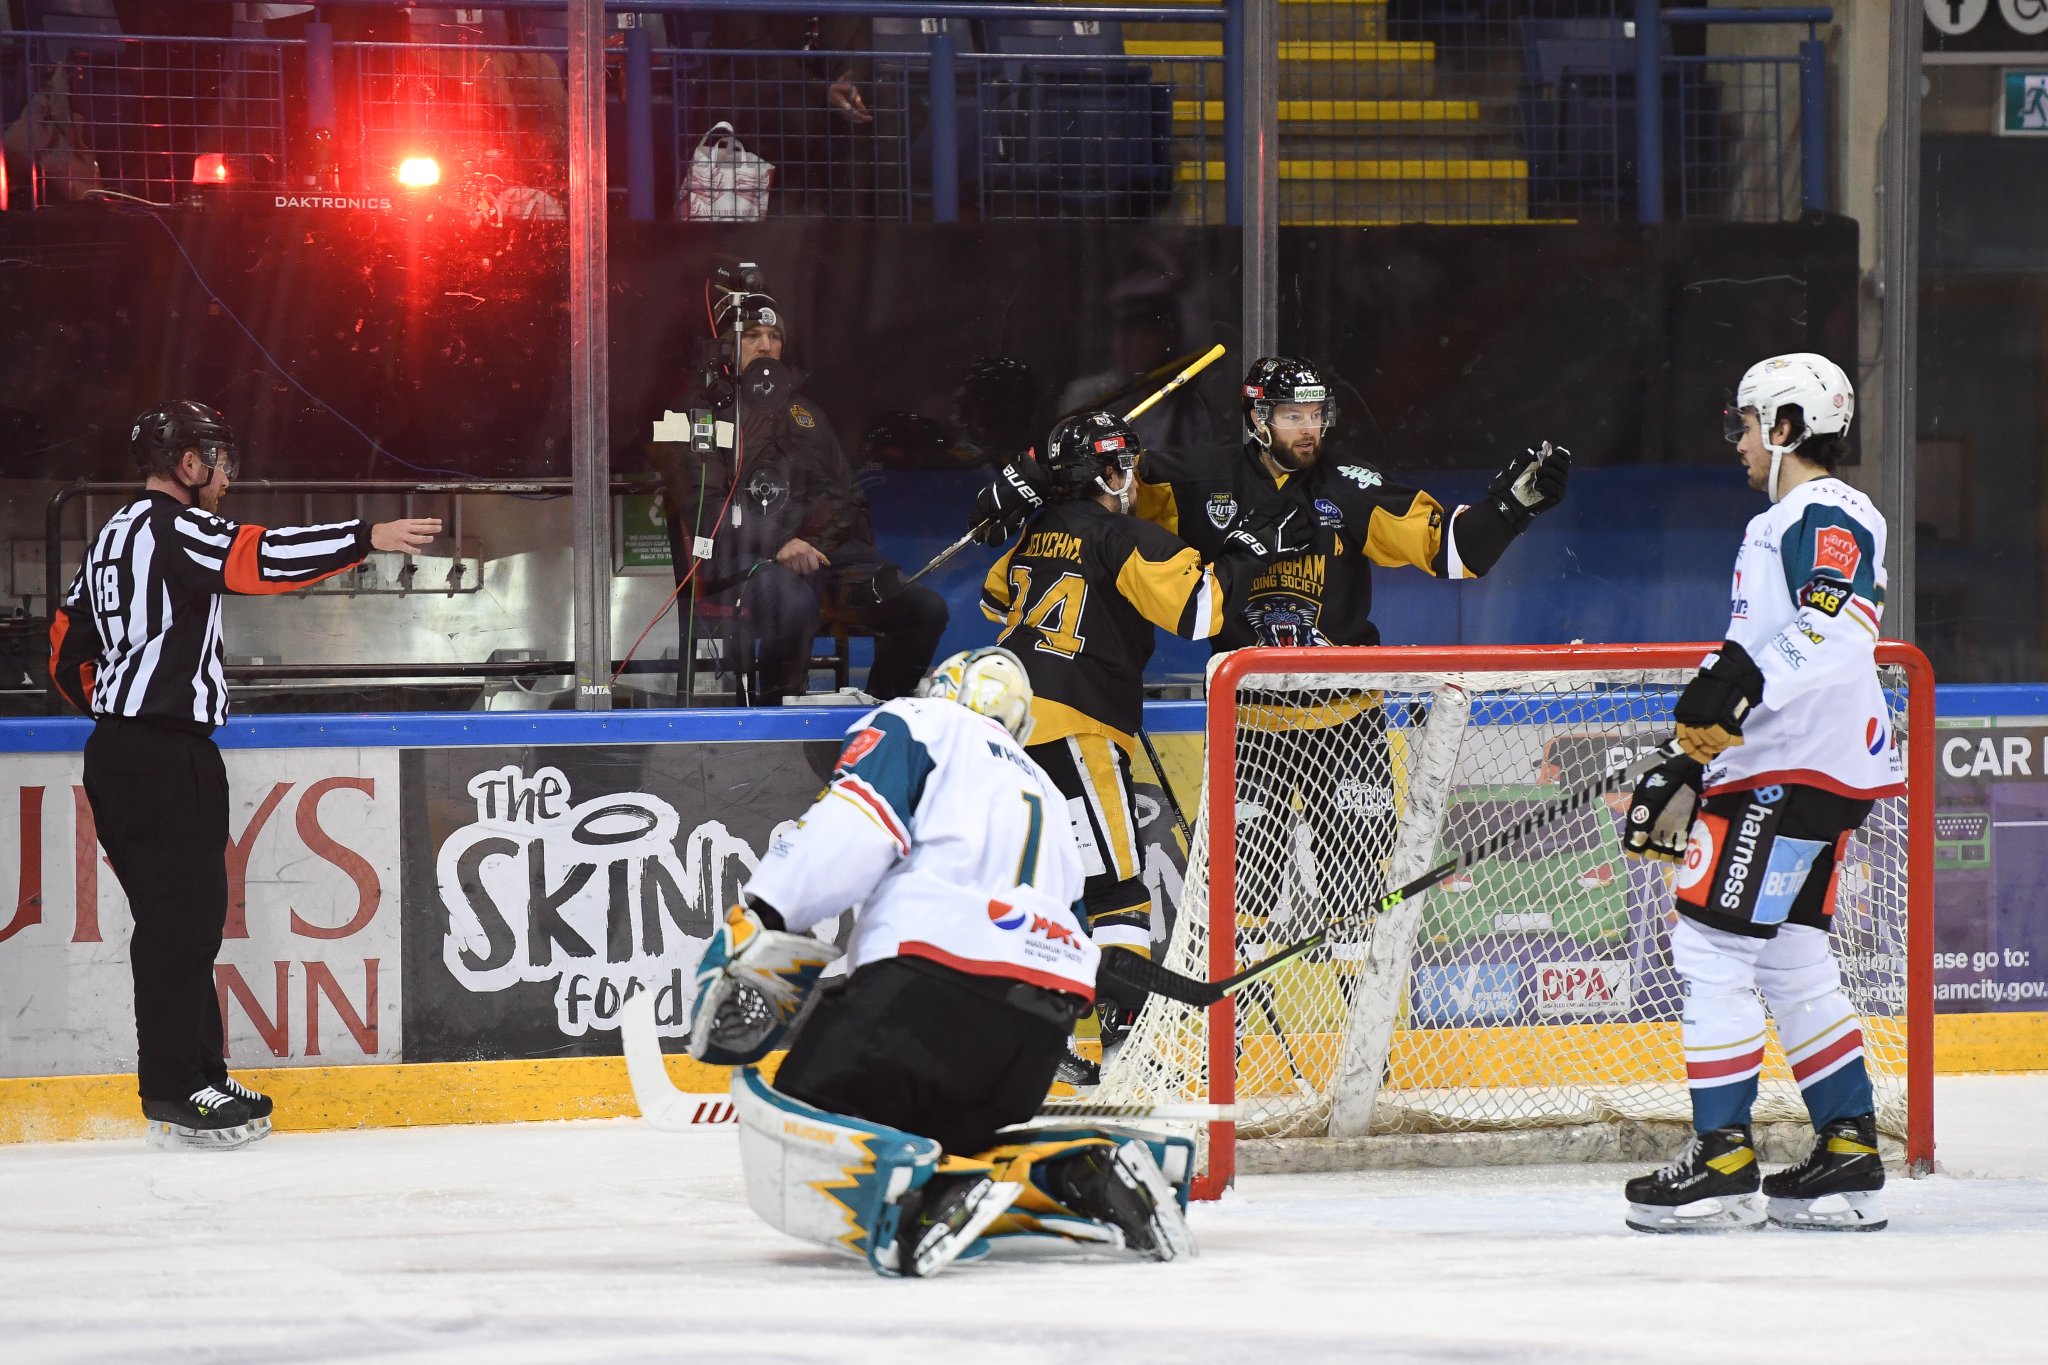 CHALLENGE CUP: PANTHERS 3-2 GIANTS Top Image